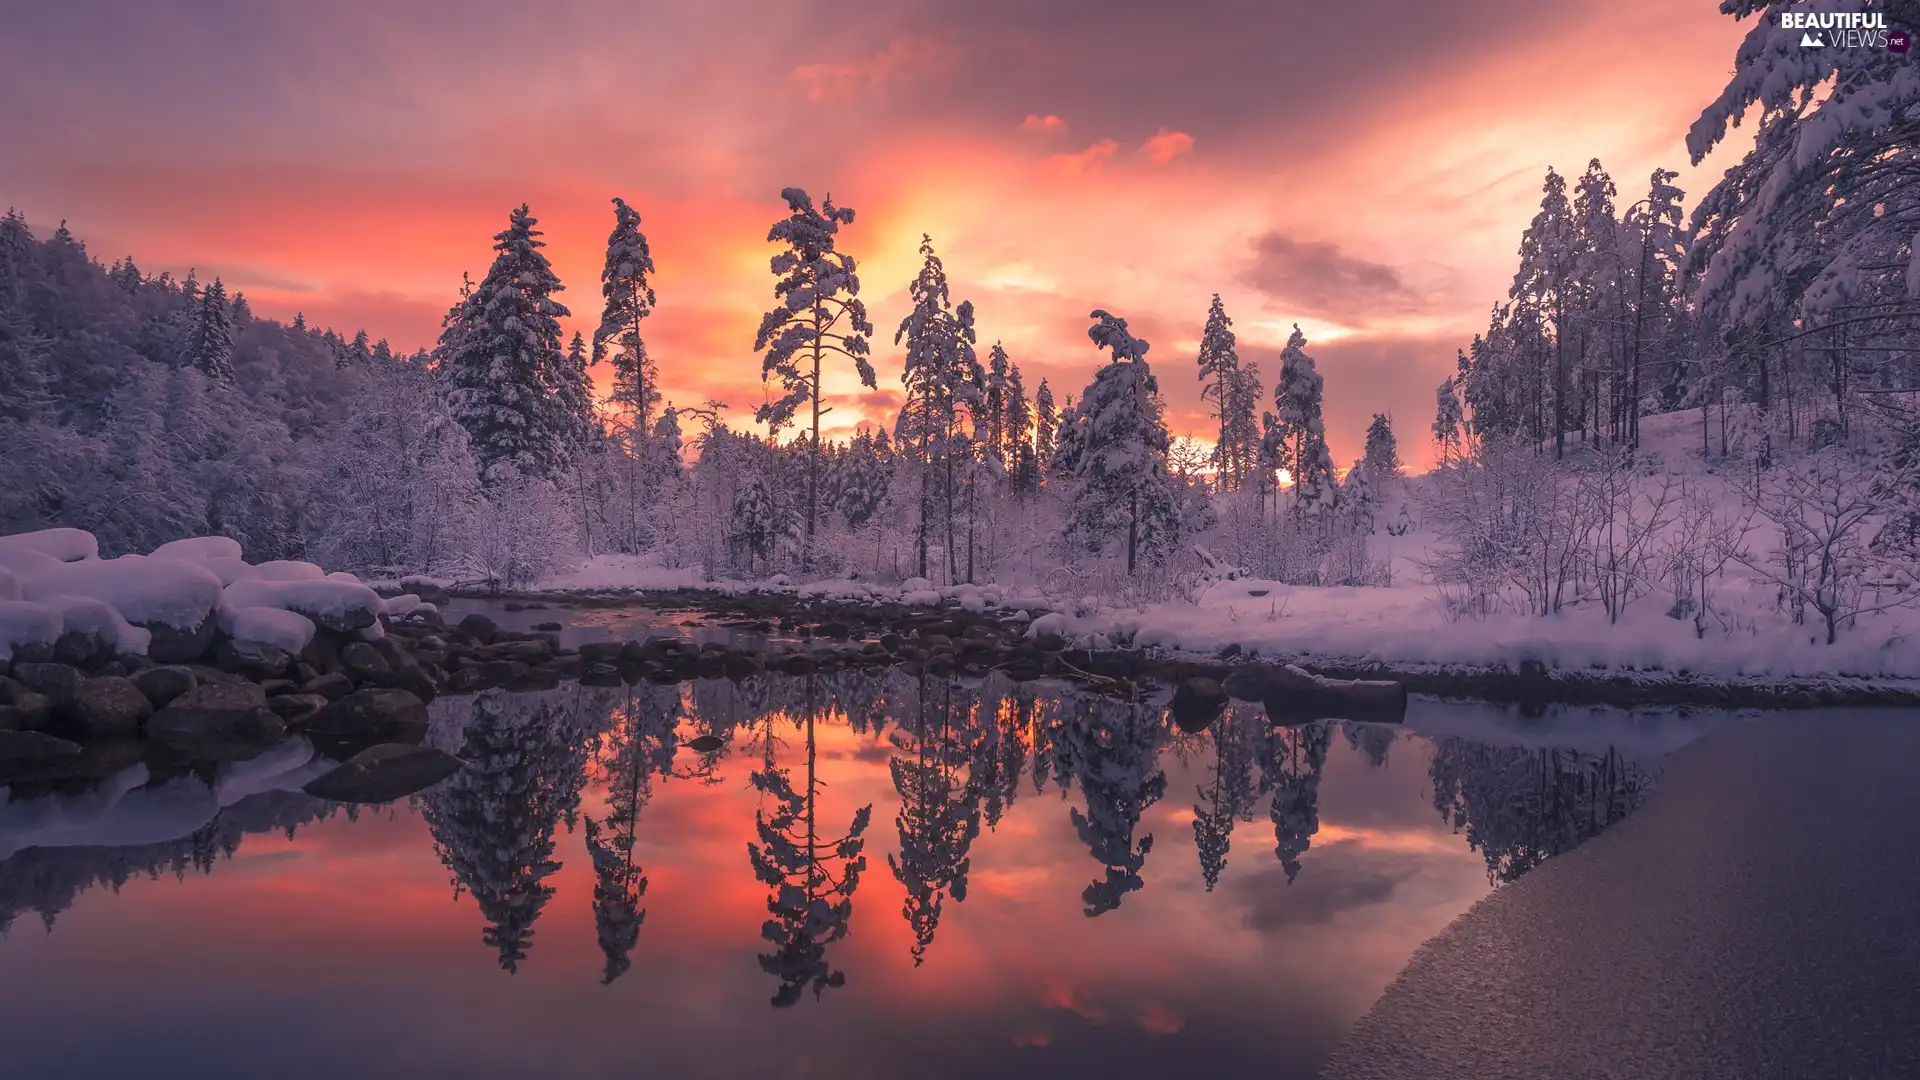 Stones, lake, viewes, Snowy, winter, trees, Great Sunsets